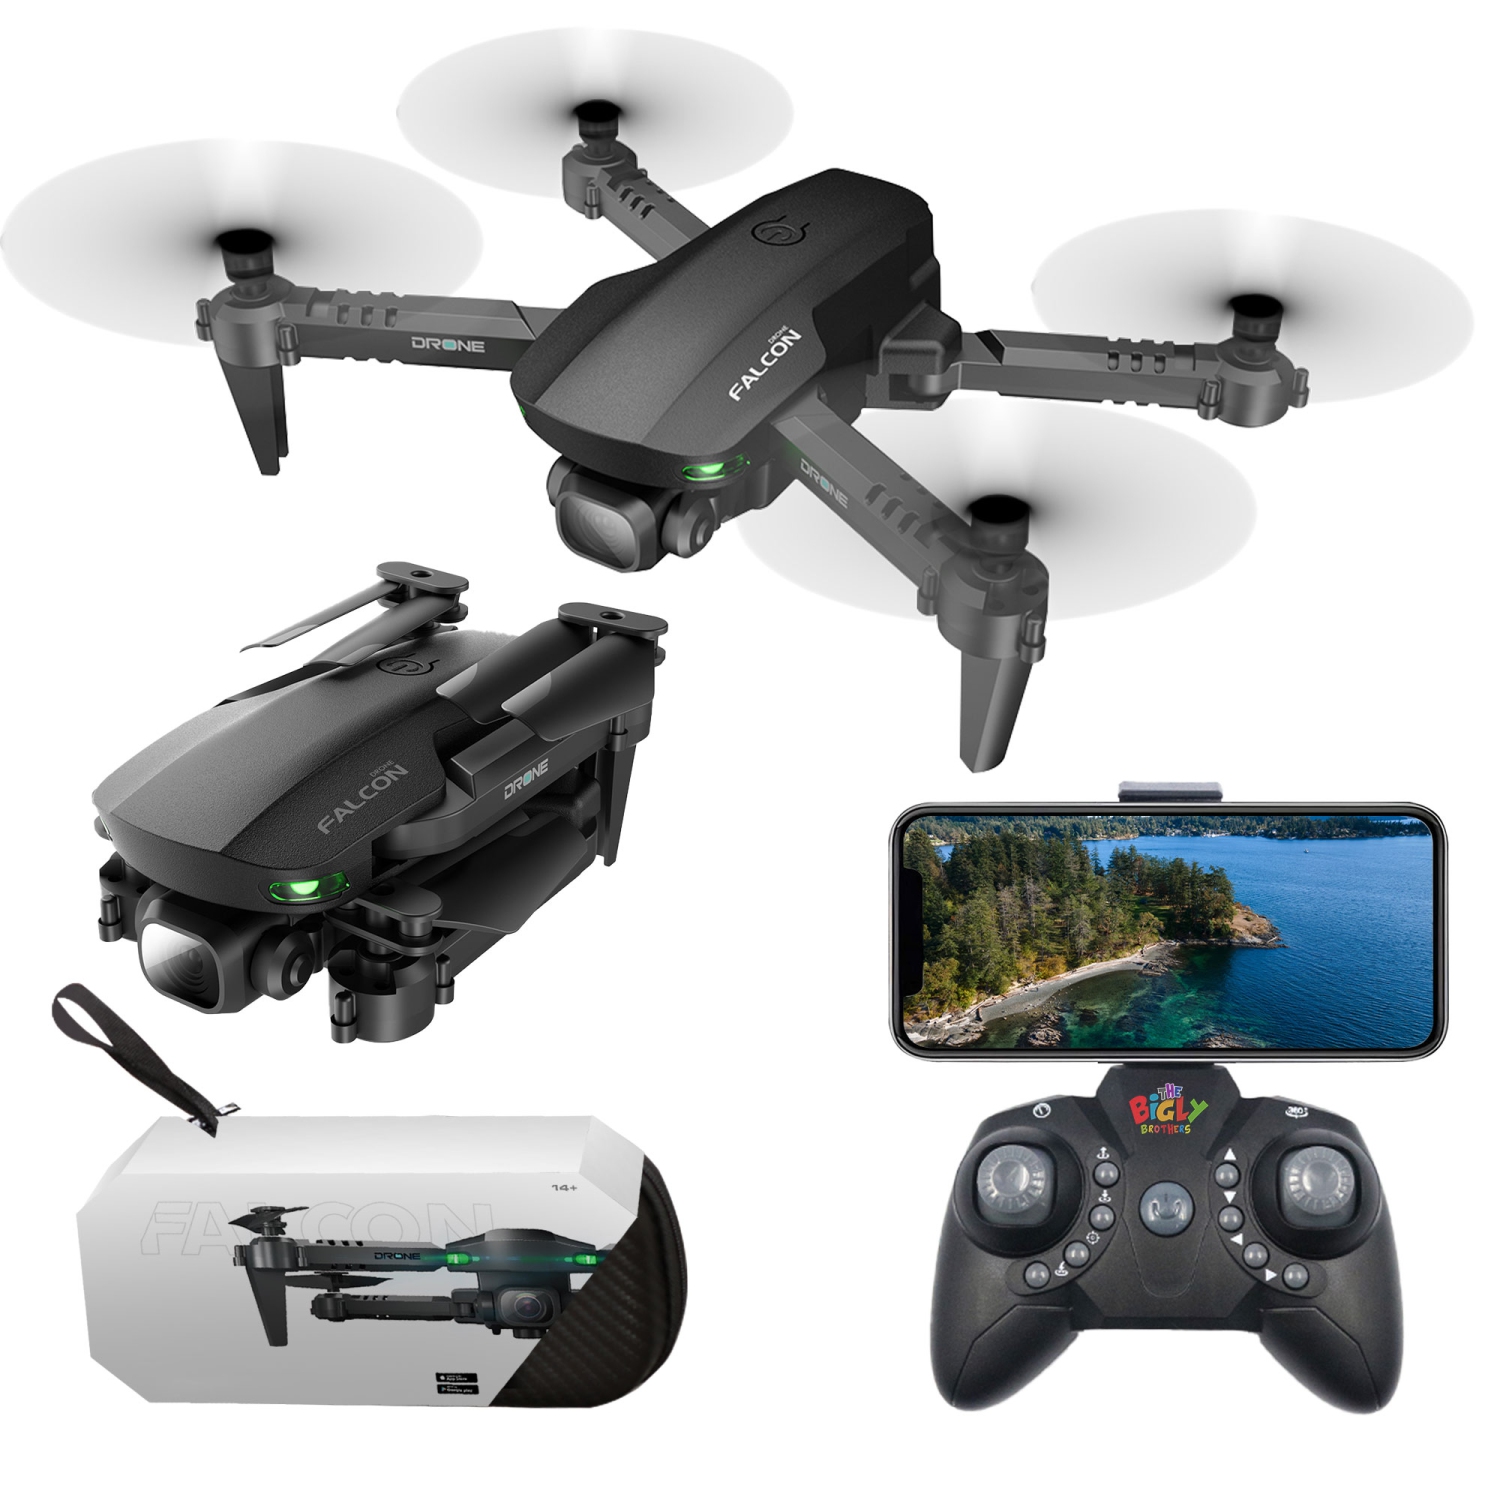 Open Box - The Bigly Brothers E58 Falcon Mark III Drone, Drone with Camera, Ready to fly, Below 249g . 4k Drone, NO ASSEMBLY REQUIRED Ready to Fly Mini Pocket Drone!